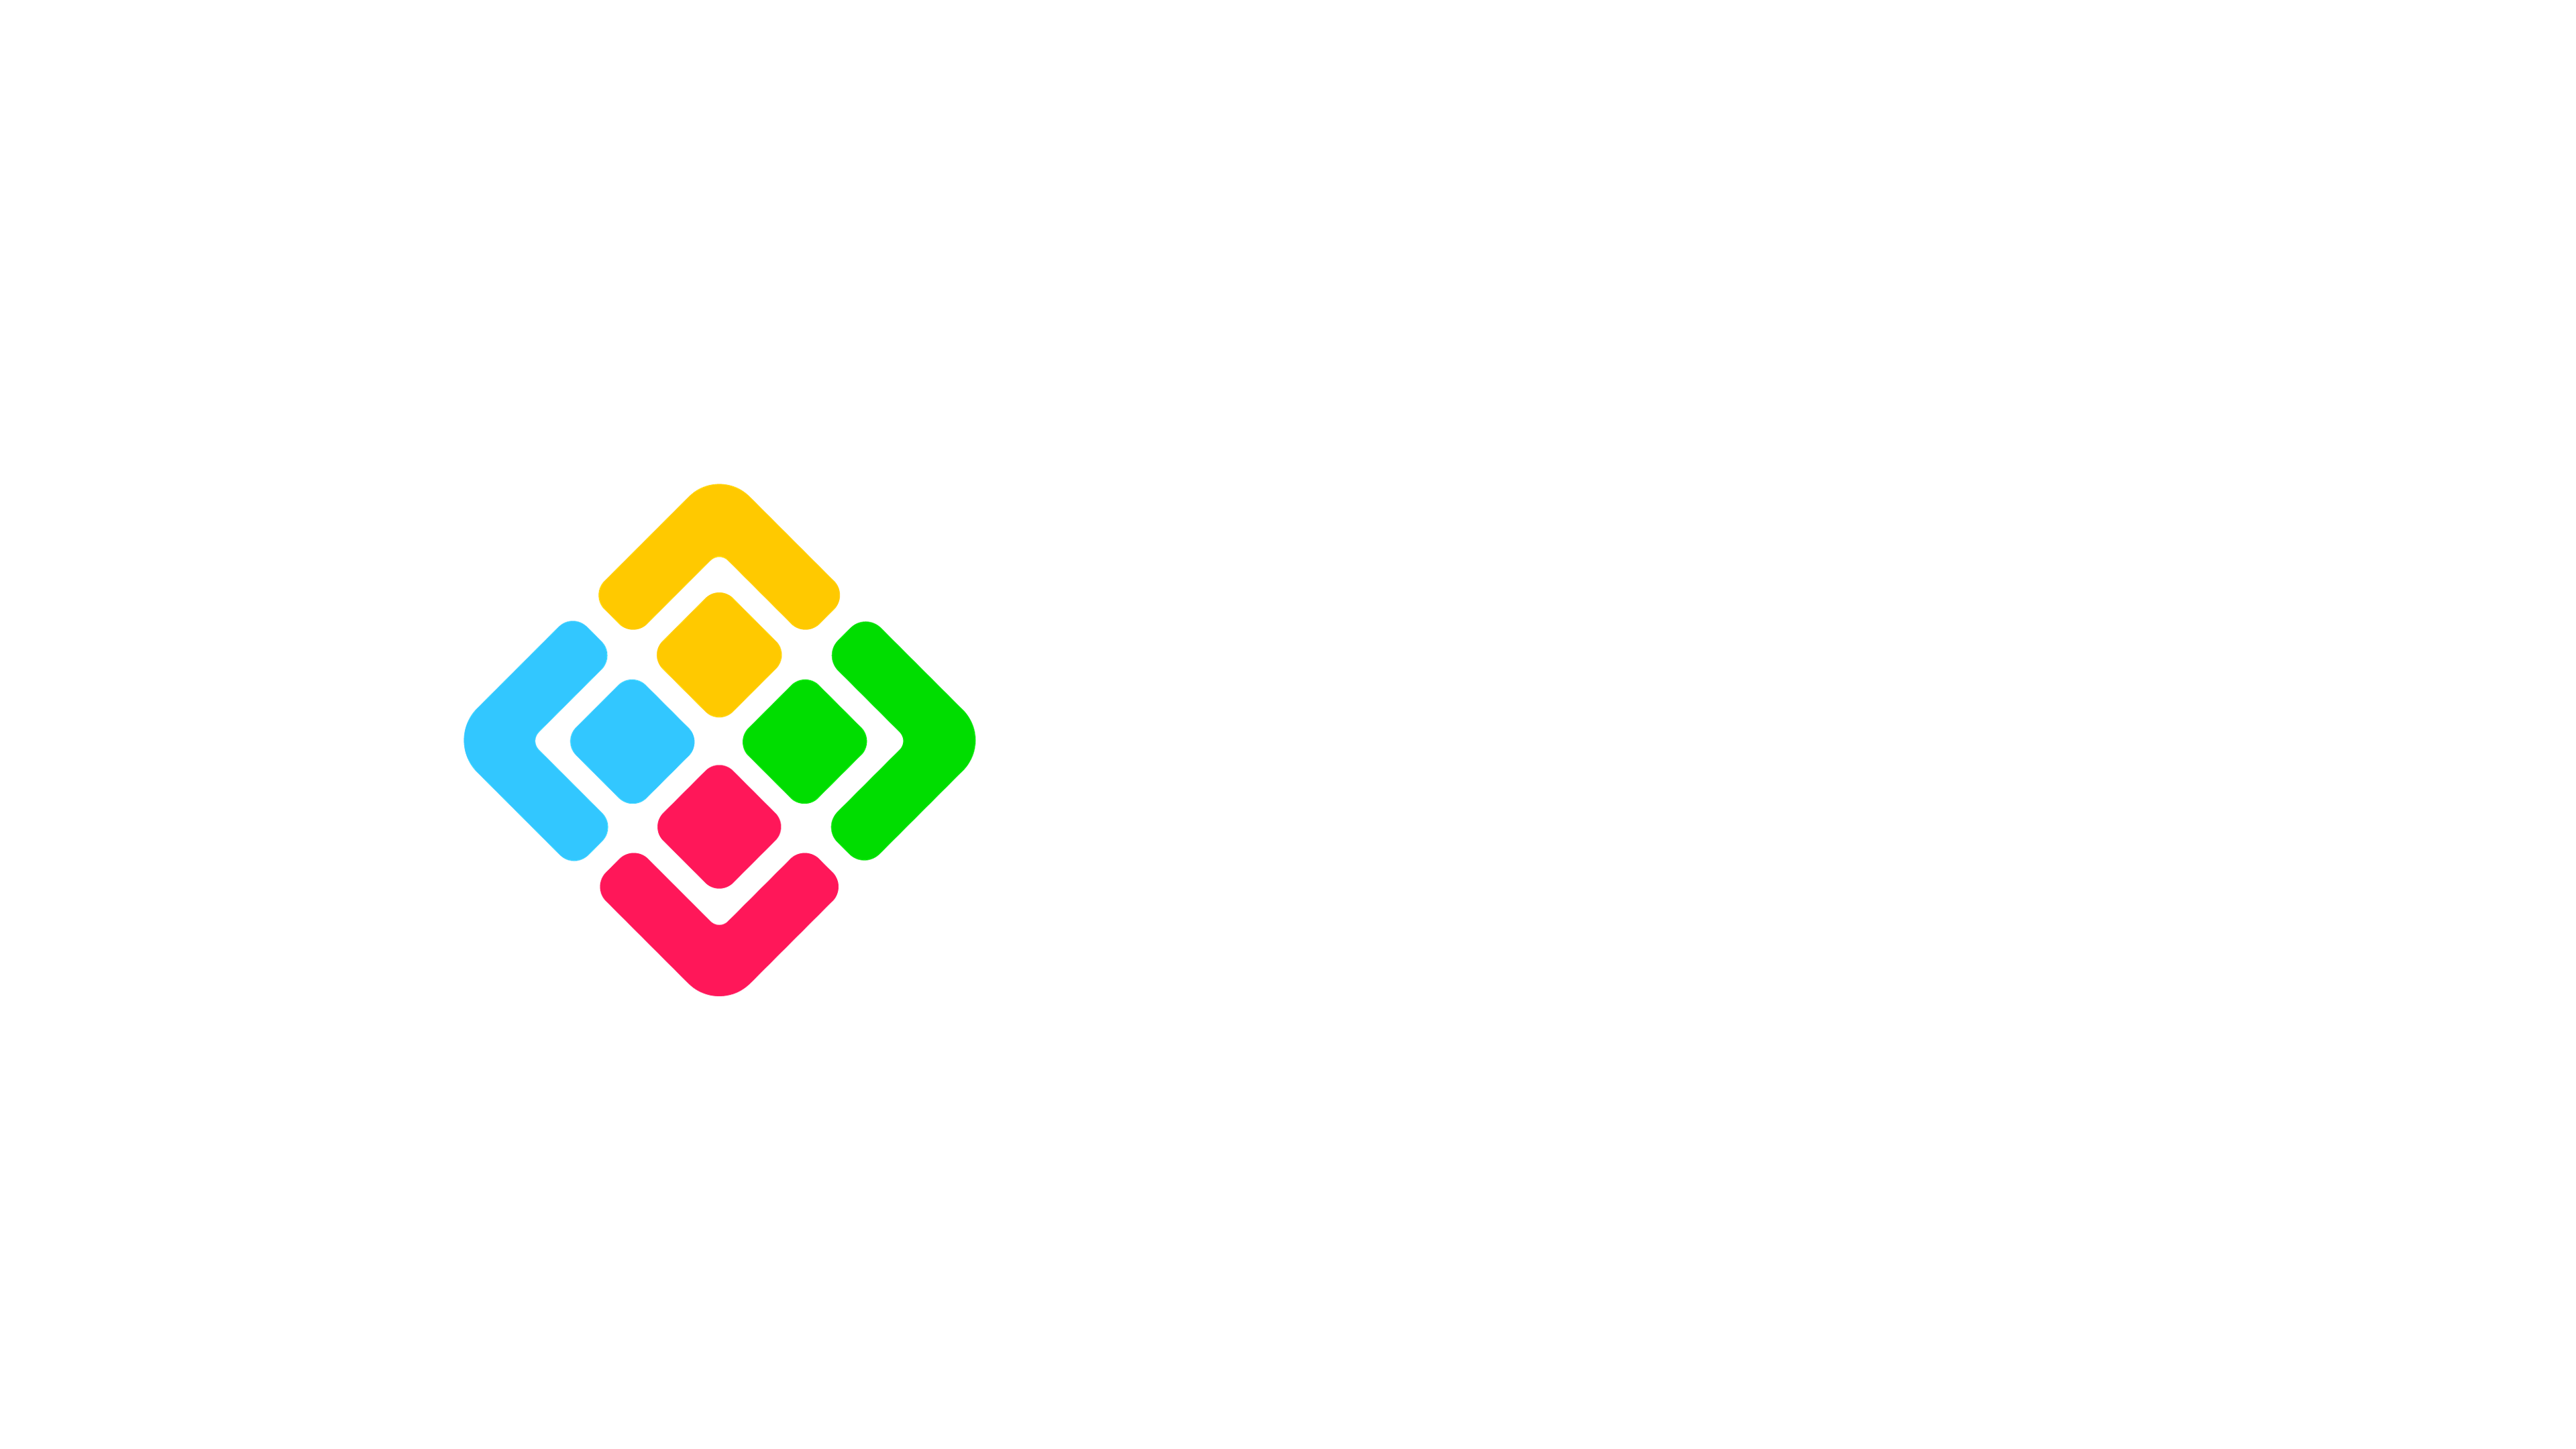 sw271c supports world-leading video calibration software, Calman and LightSpace